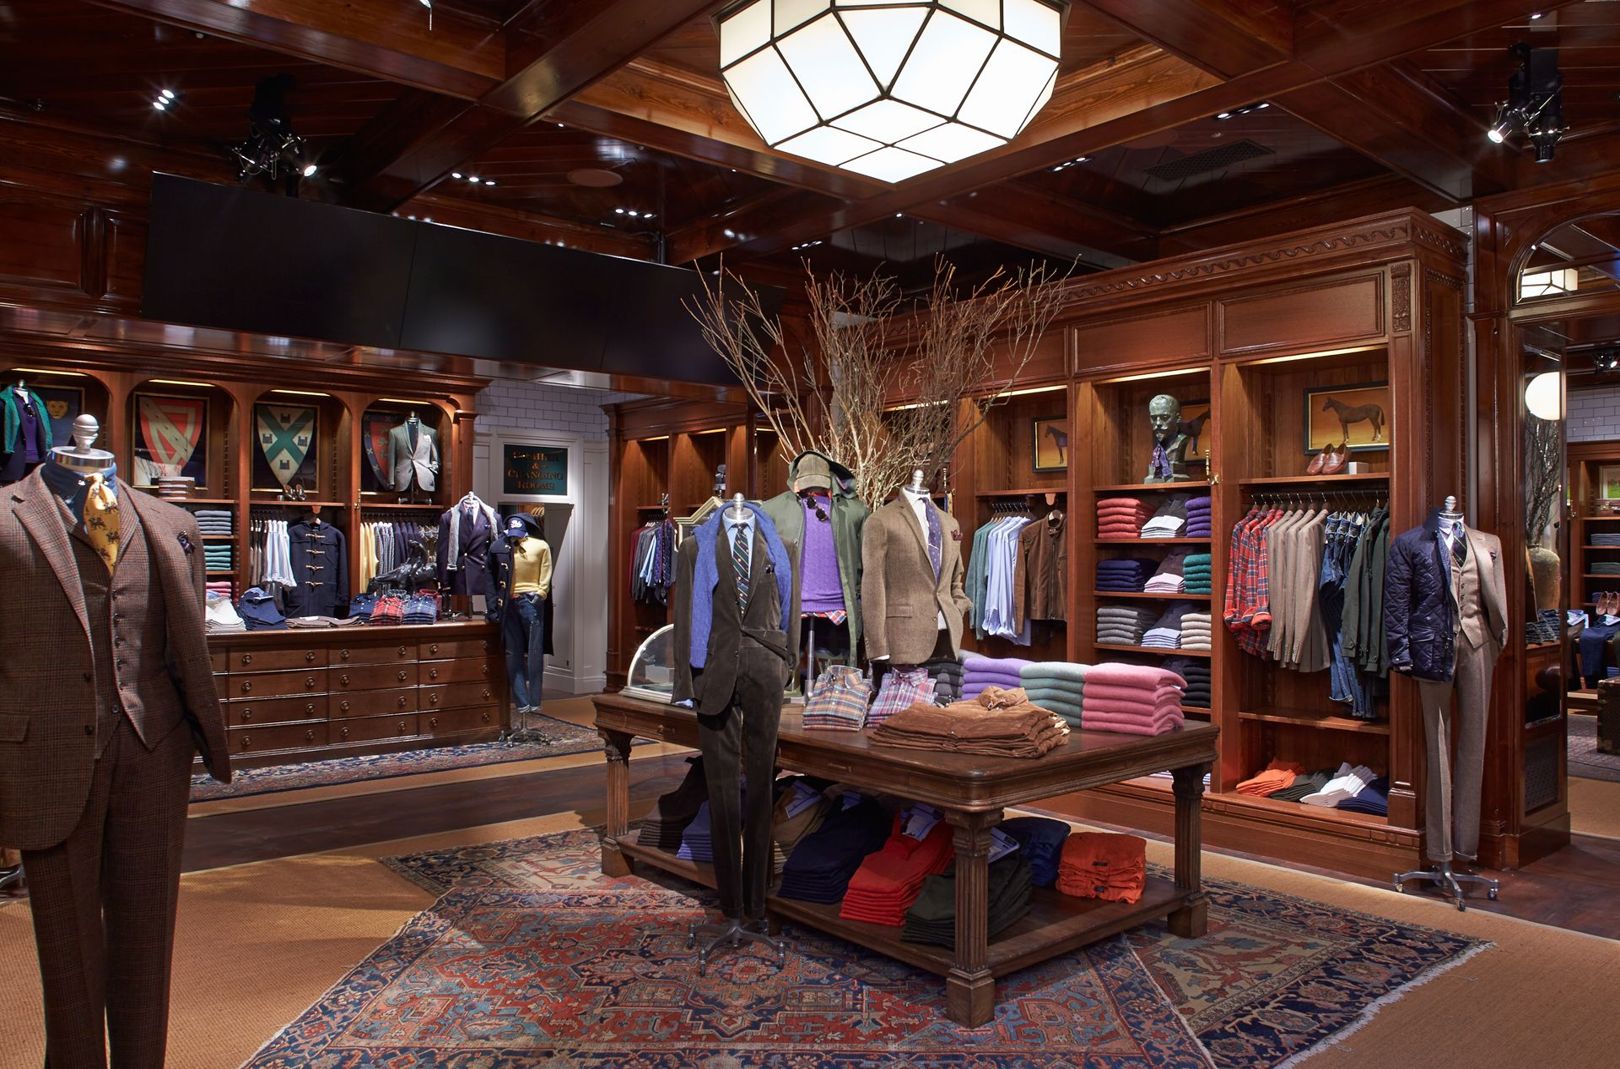  Polo  Ralph  Lauren  opens its new London Flagship with the 